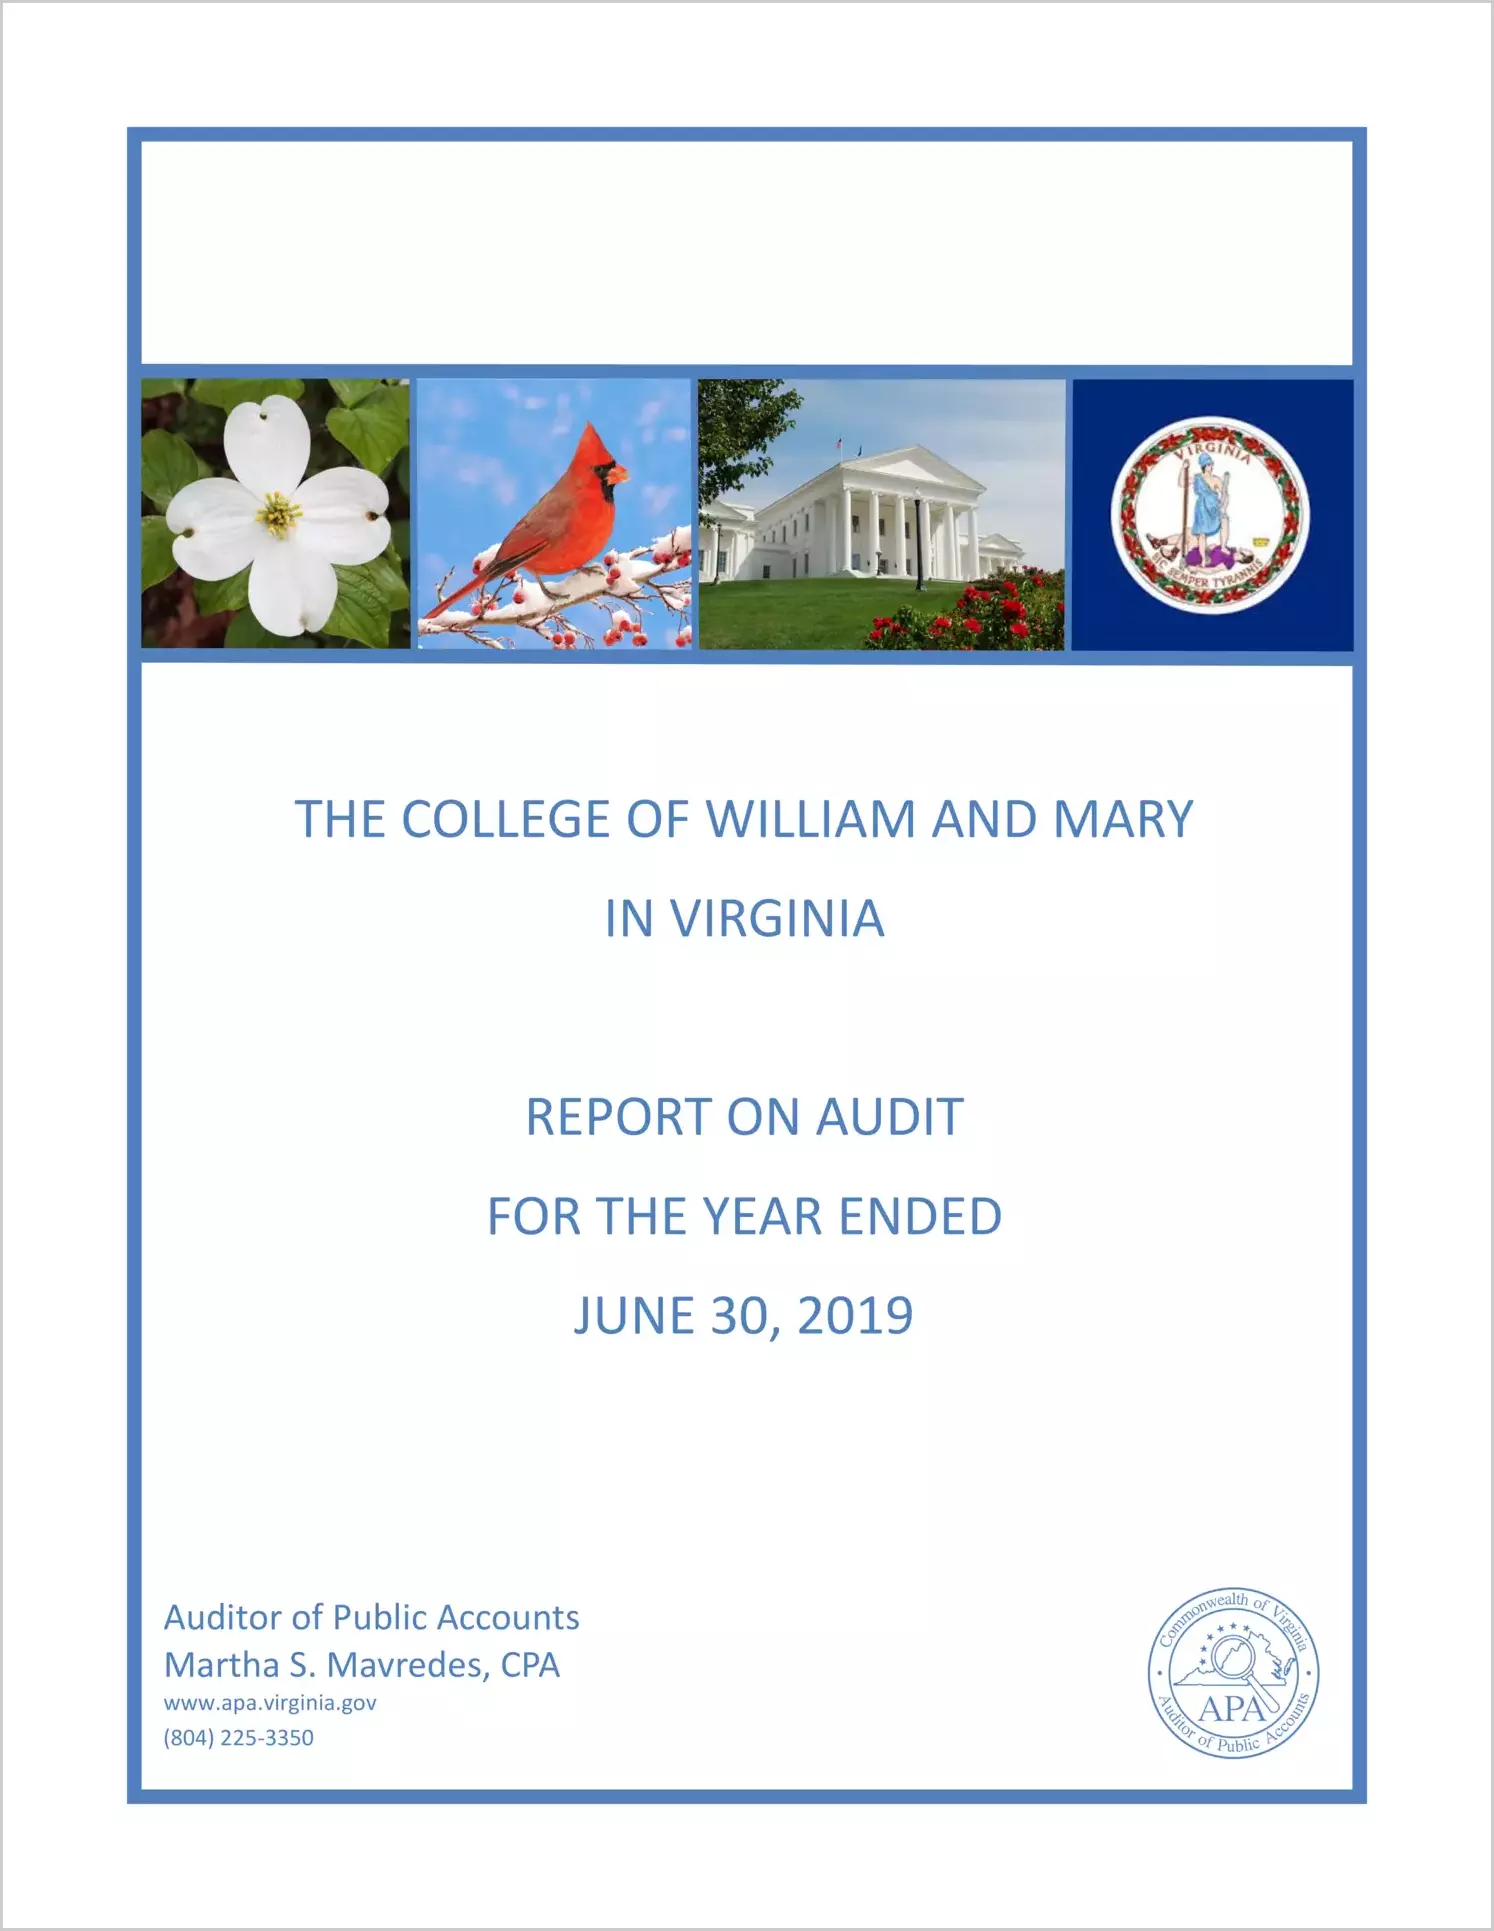 The College of William and Mary in Virginia, Virginia Institute of Marine Science, and Richard Bland College for the year ended June 30, 2019